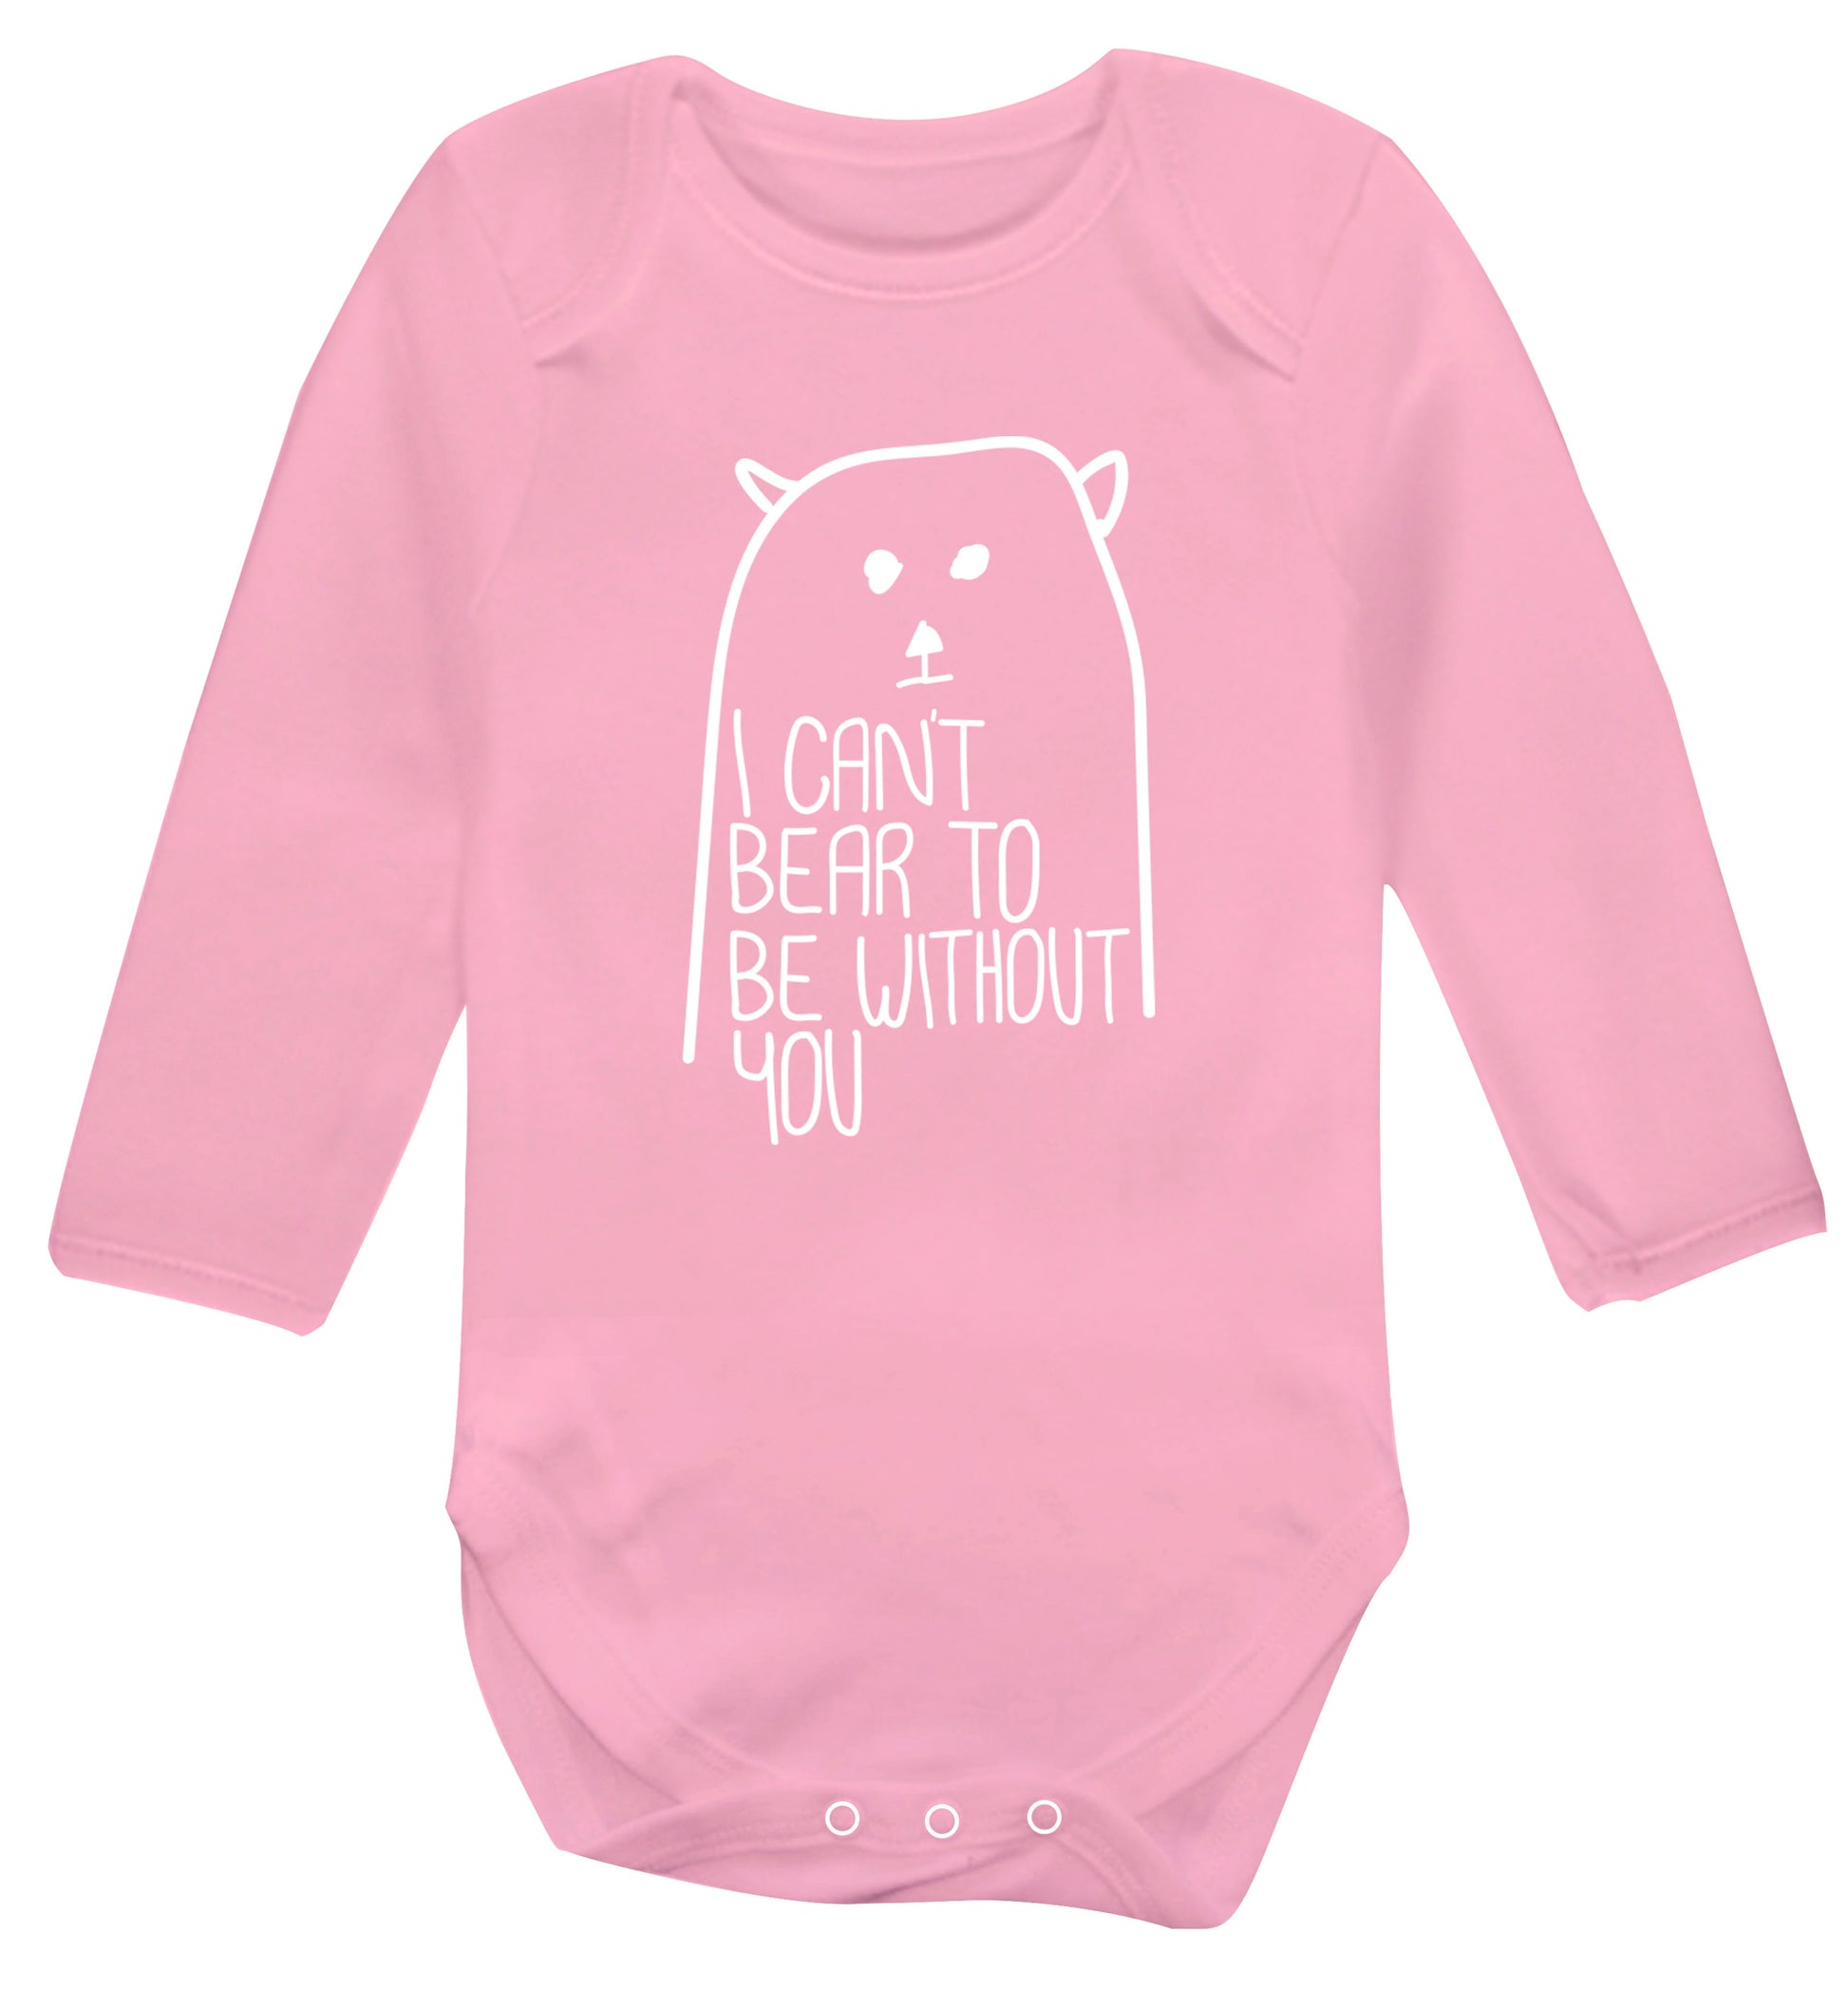 I can't bear to be without you Baby Vest long sleeved pale pink 6-12 months